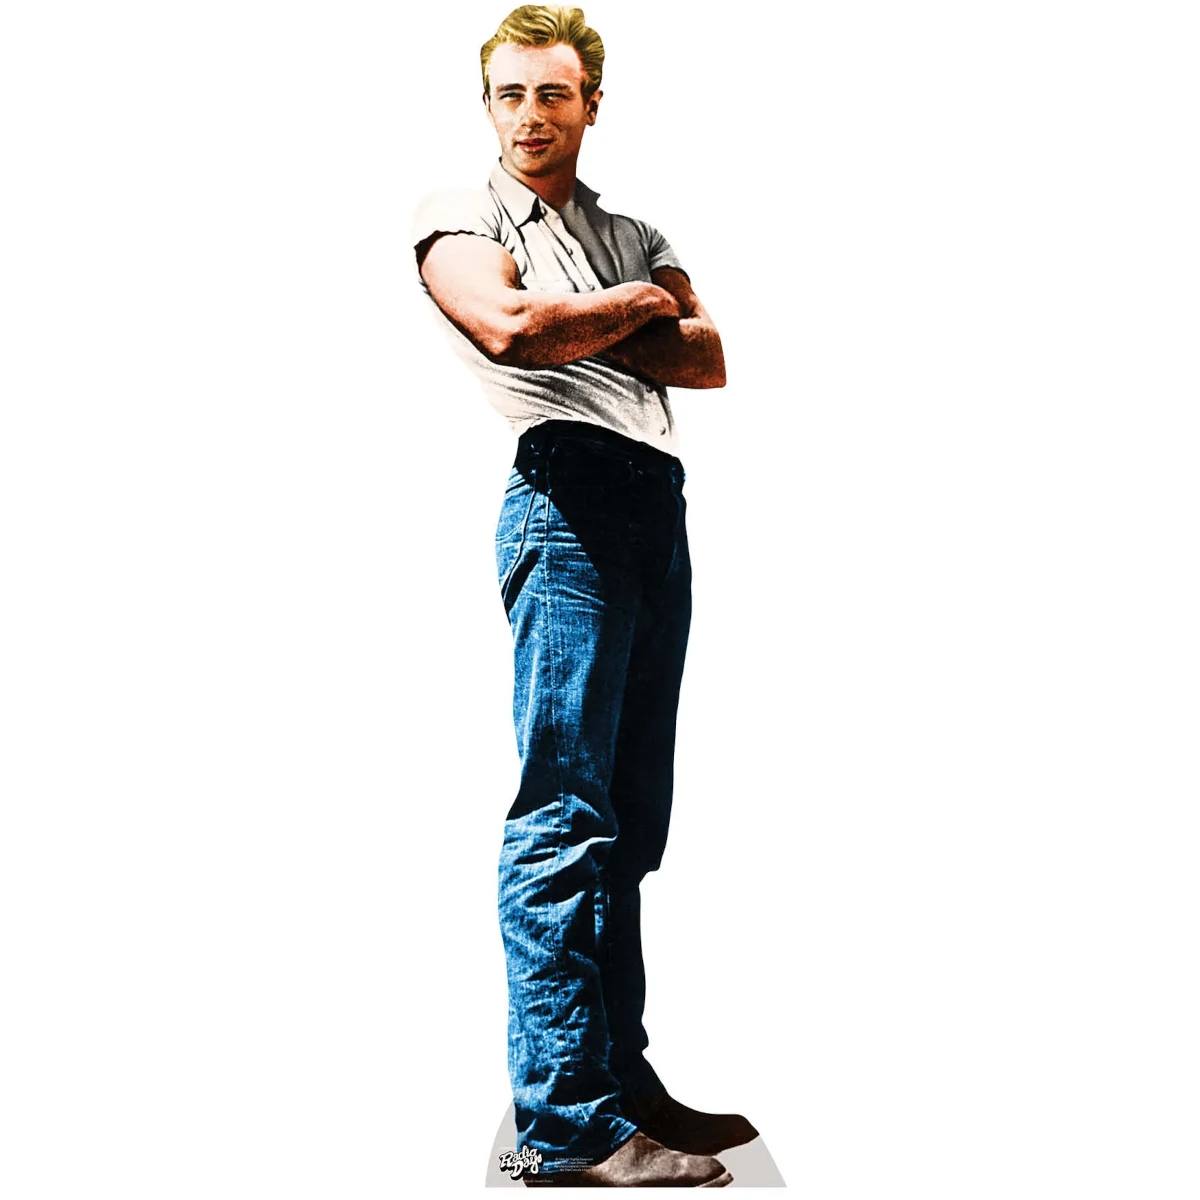 SC521 James Dean 'Rebel Without a Cause' (American Actor) Lifesize Cardboard Cutout Standee Front